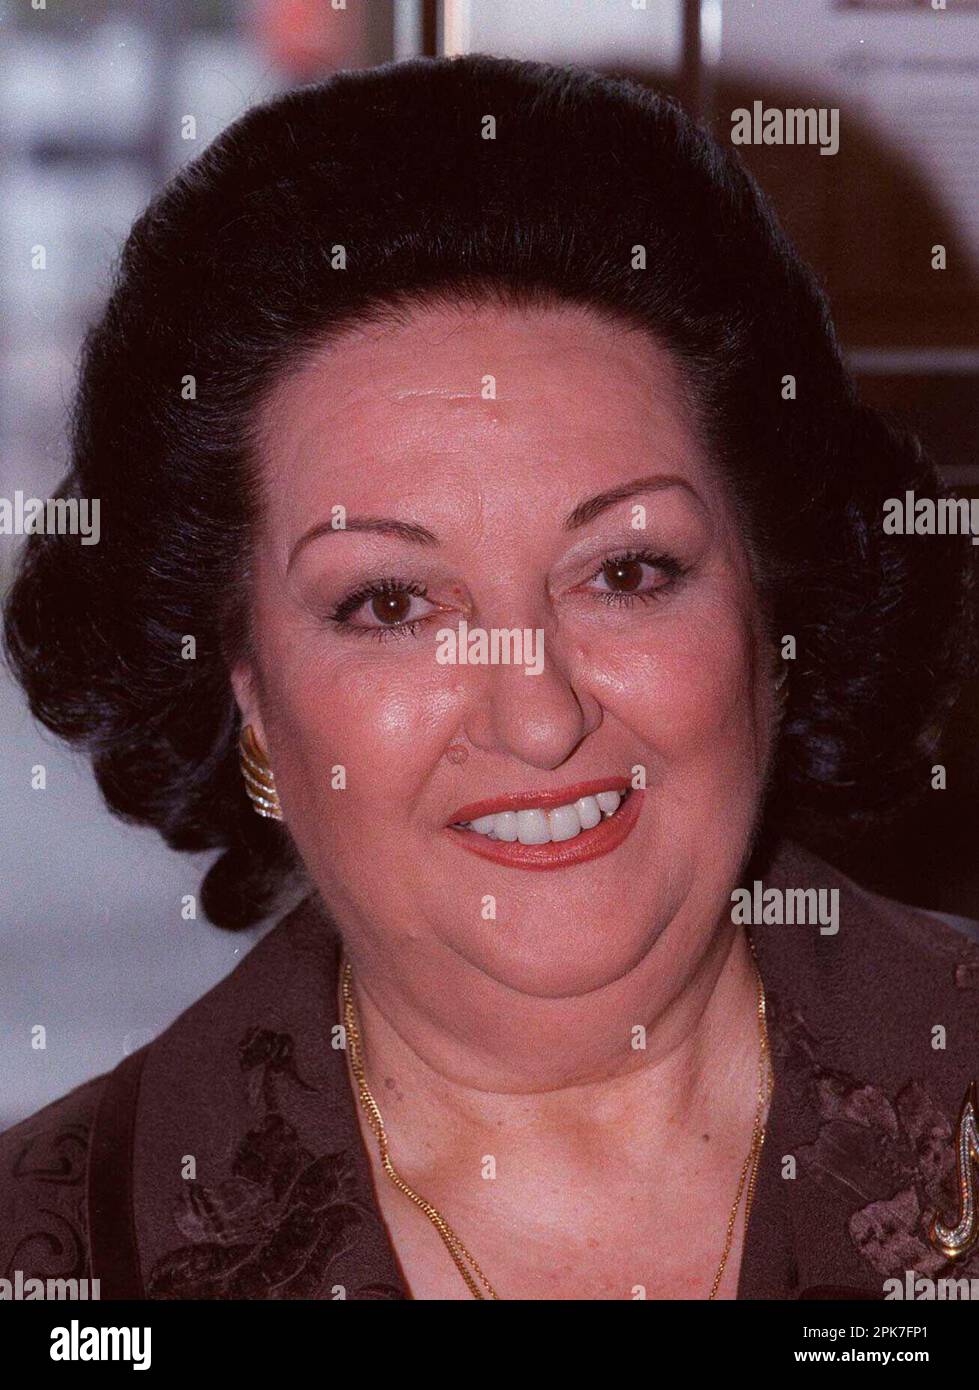 ARCHIVE PHOTO: Montserrat Caballe would have been 90 years old on April ...